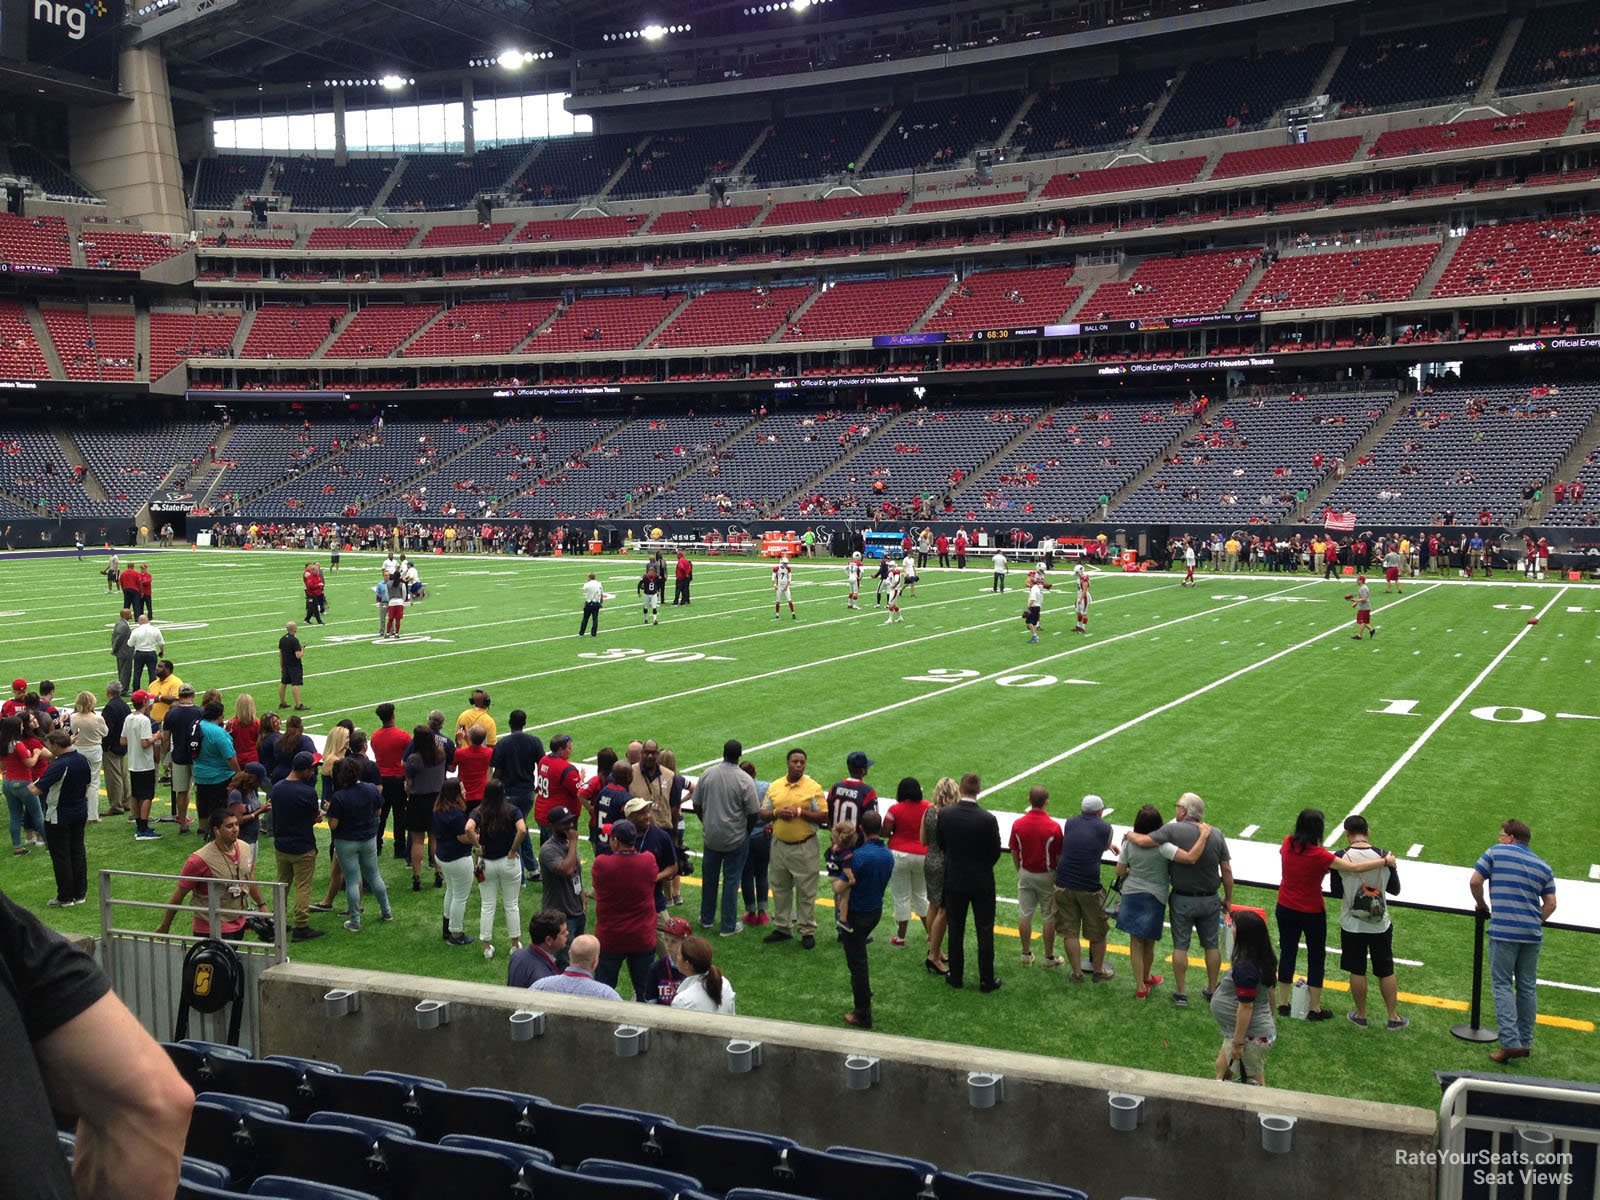 section 103, row c seat view  for football - nrg stadium